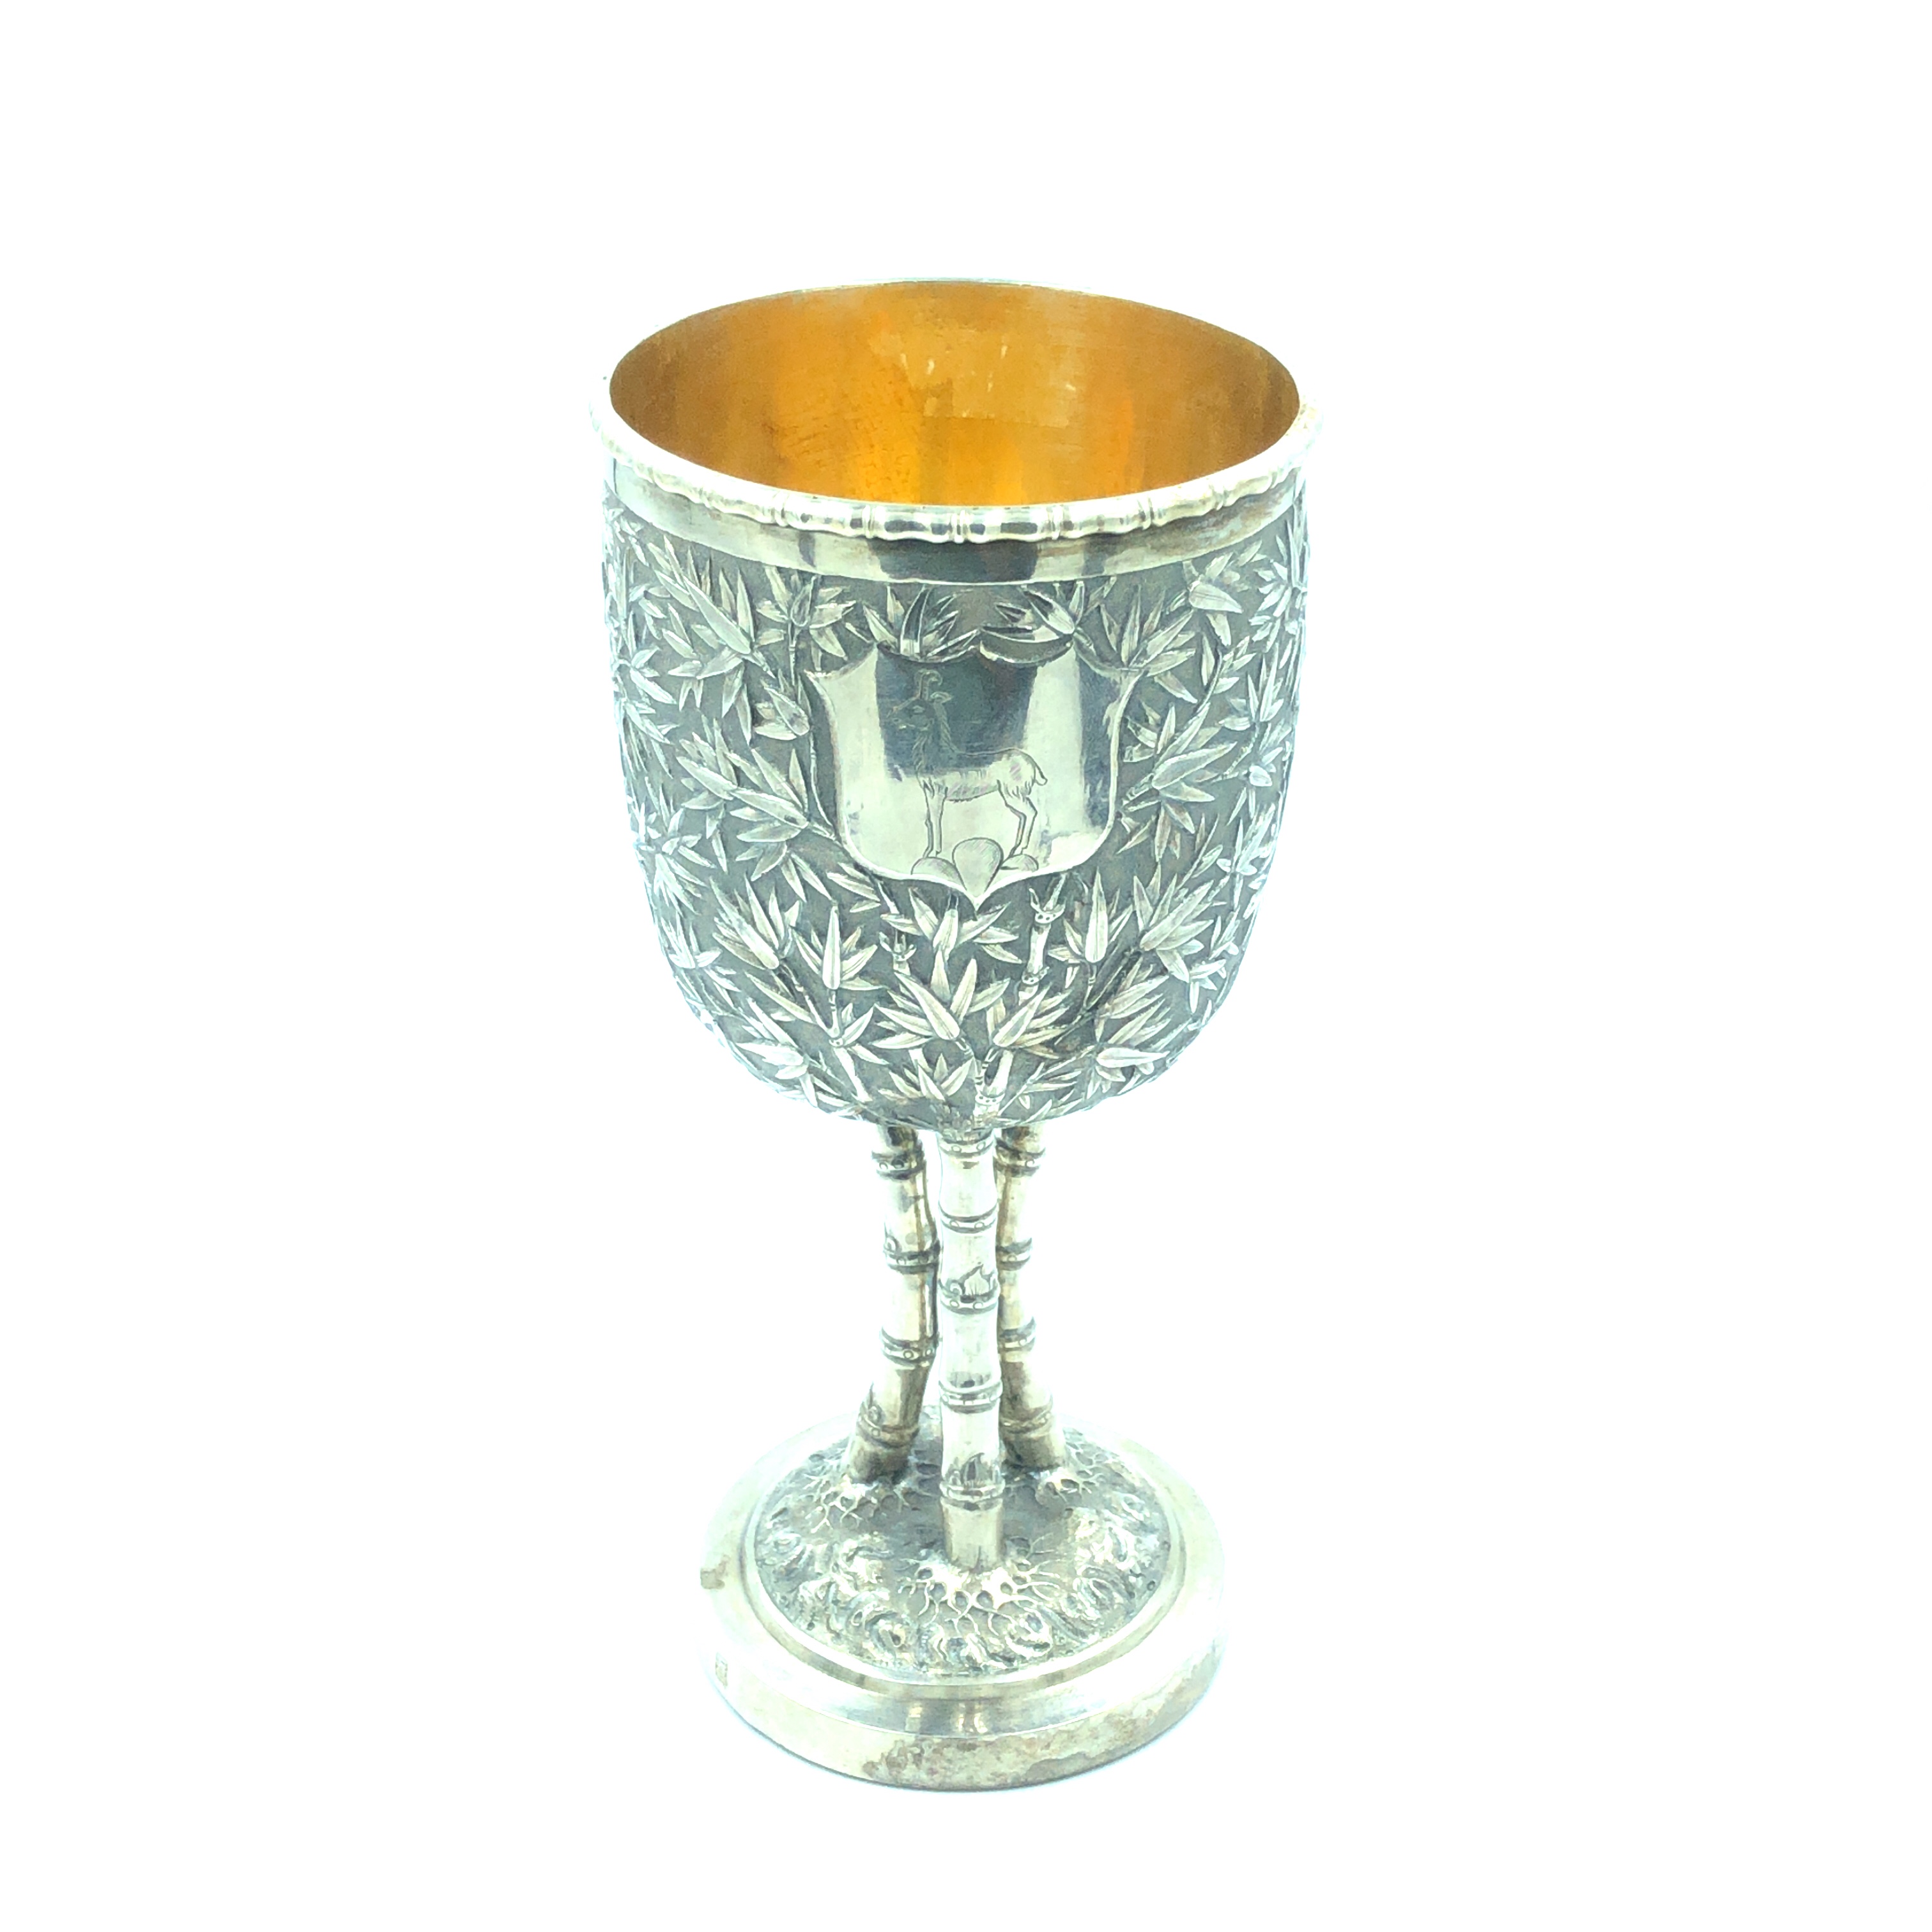 Set of Six Very Important Silver Chinese Goblets, Late 19th Century - Image 2 of 6